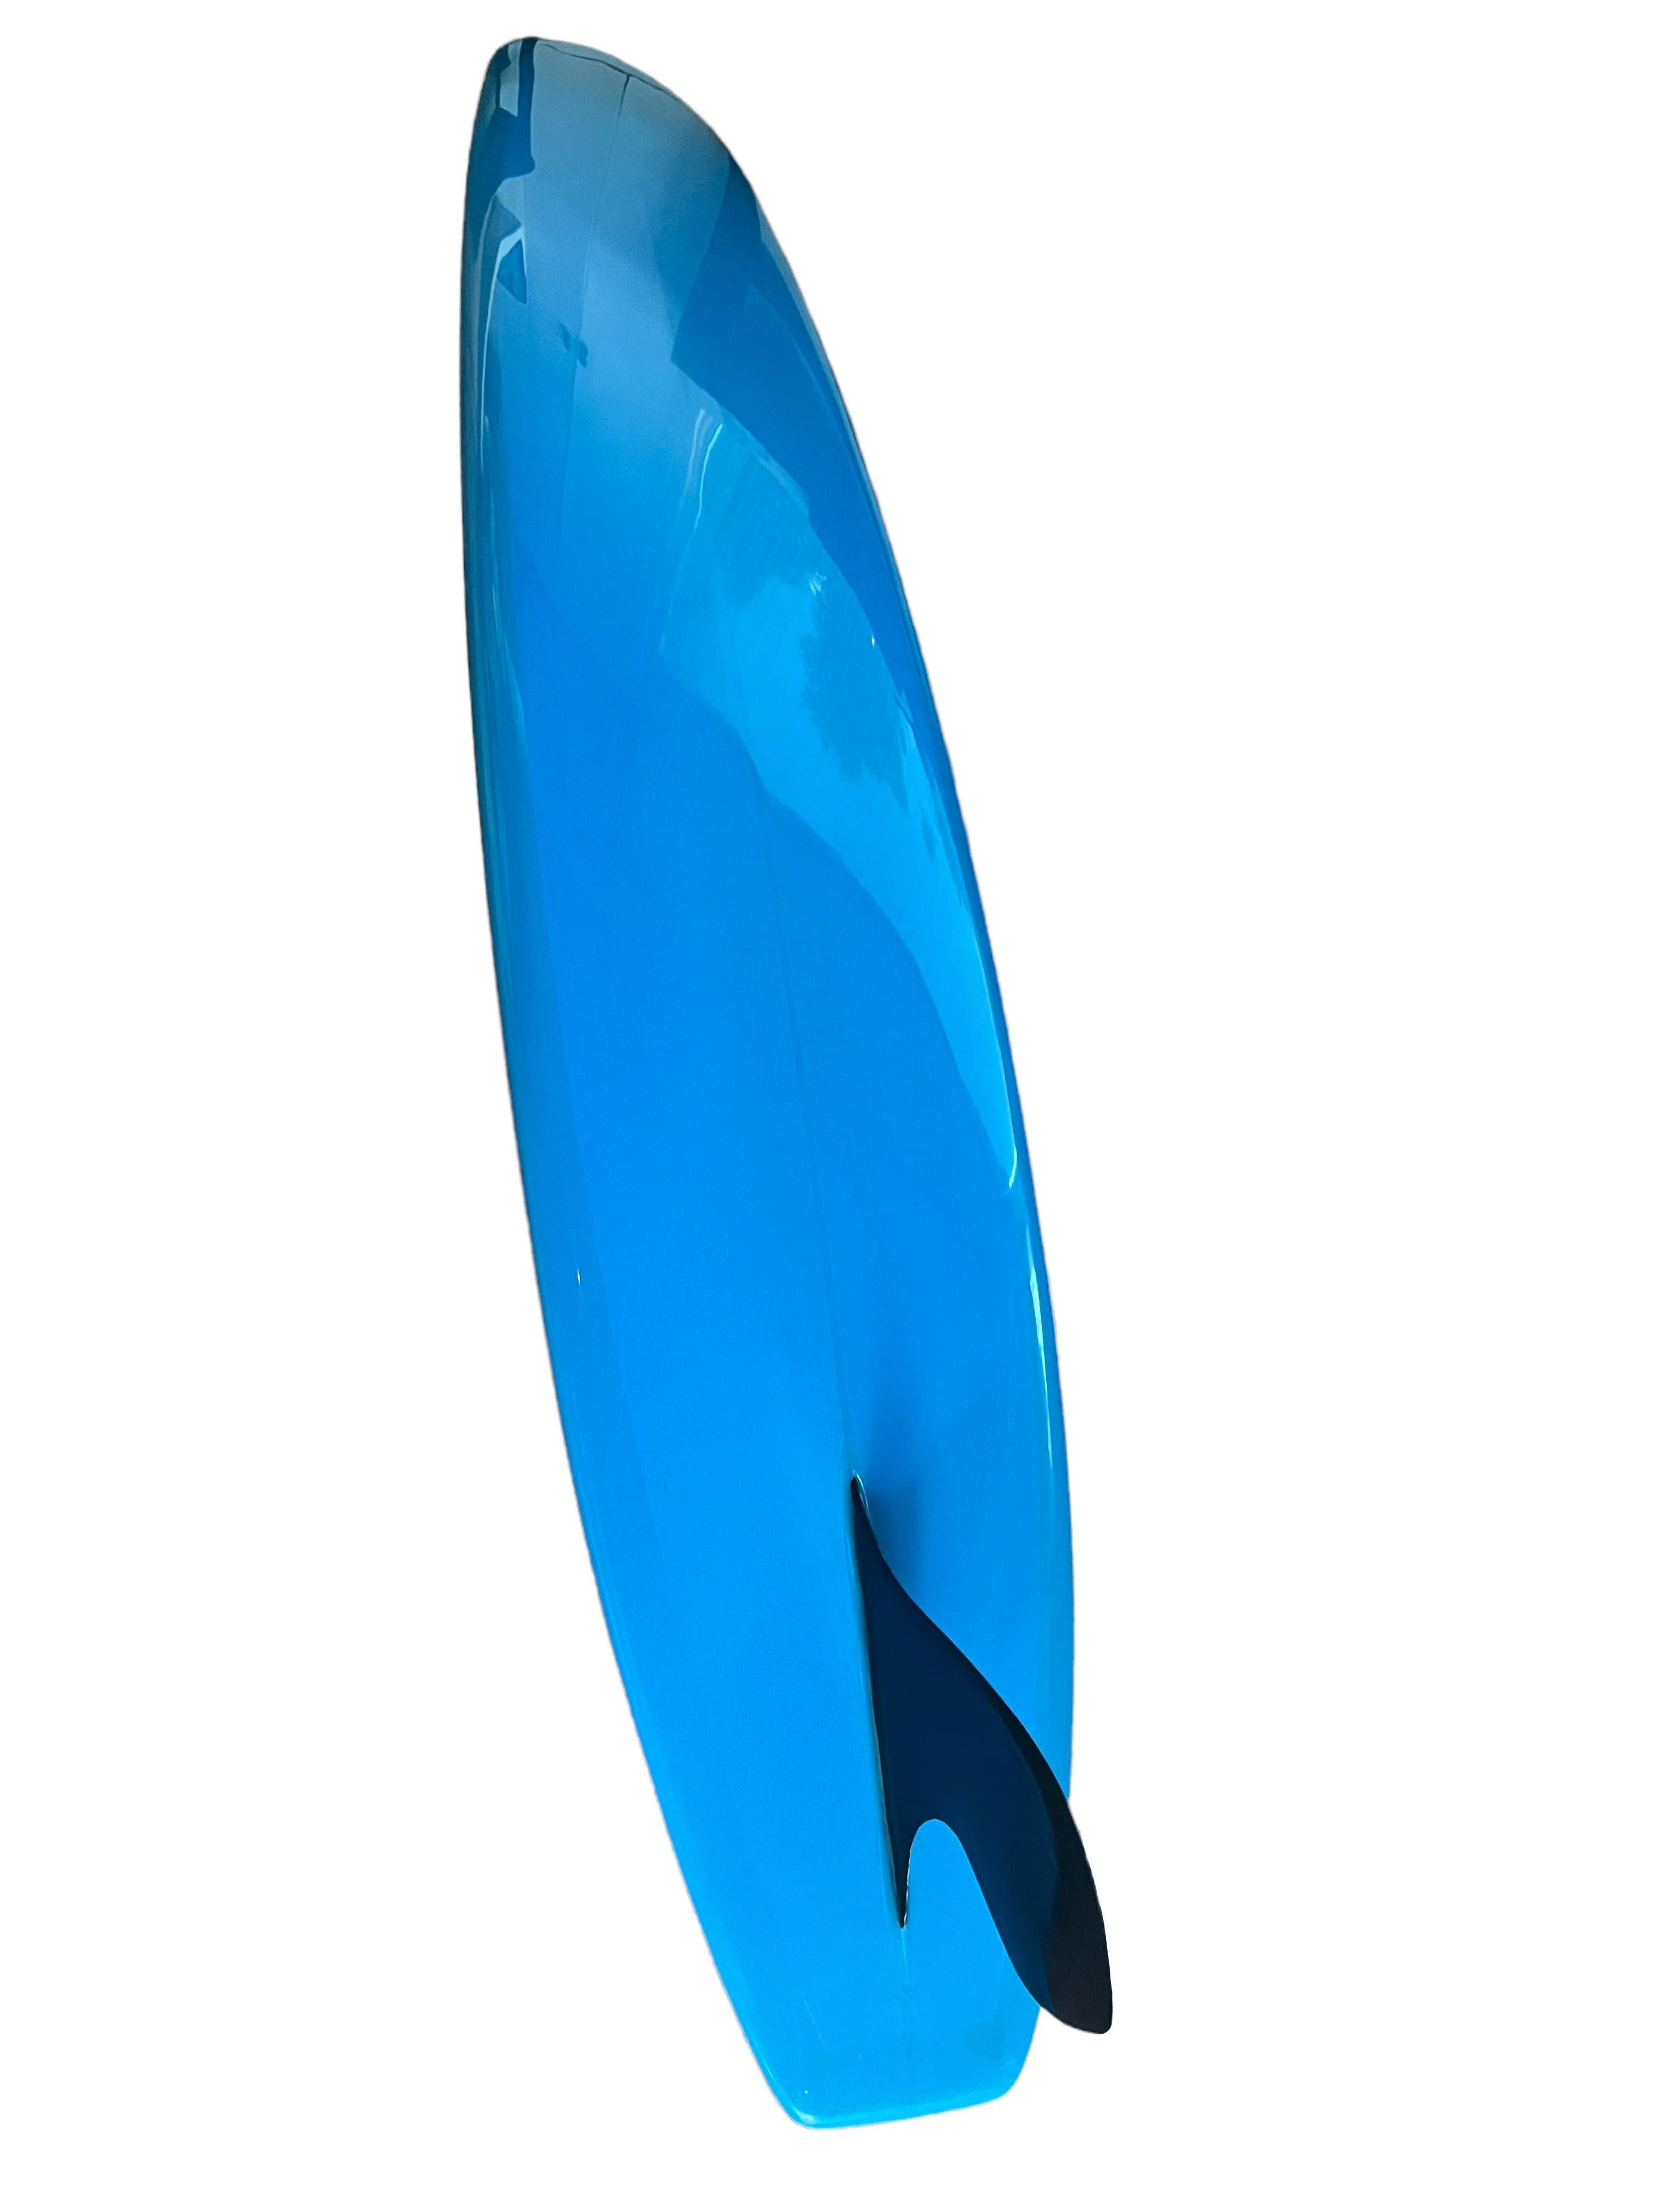 Vintage 1966 Greg Noll Miki Dora Da Cat longboard. Features an amazing turquoise paisley cloth deck with complimentary blue rails and bottom. A highly coveted 1st generation Greg Noll Miki Dora Da Cat, known by the pronounced step deck and glass-on